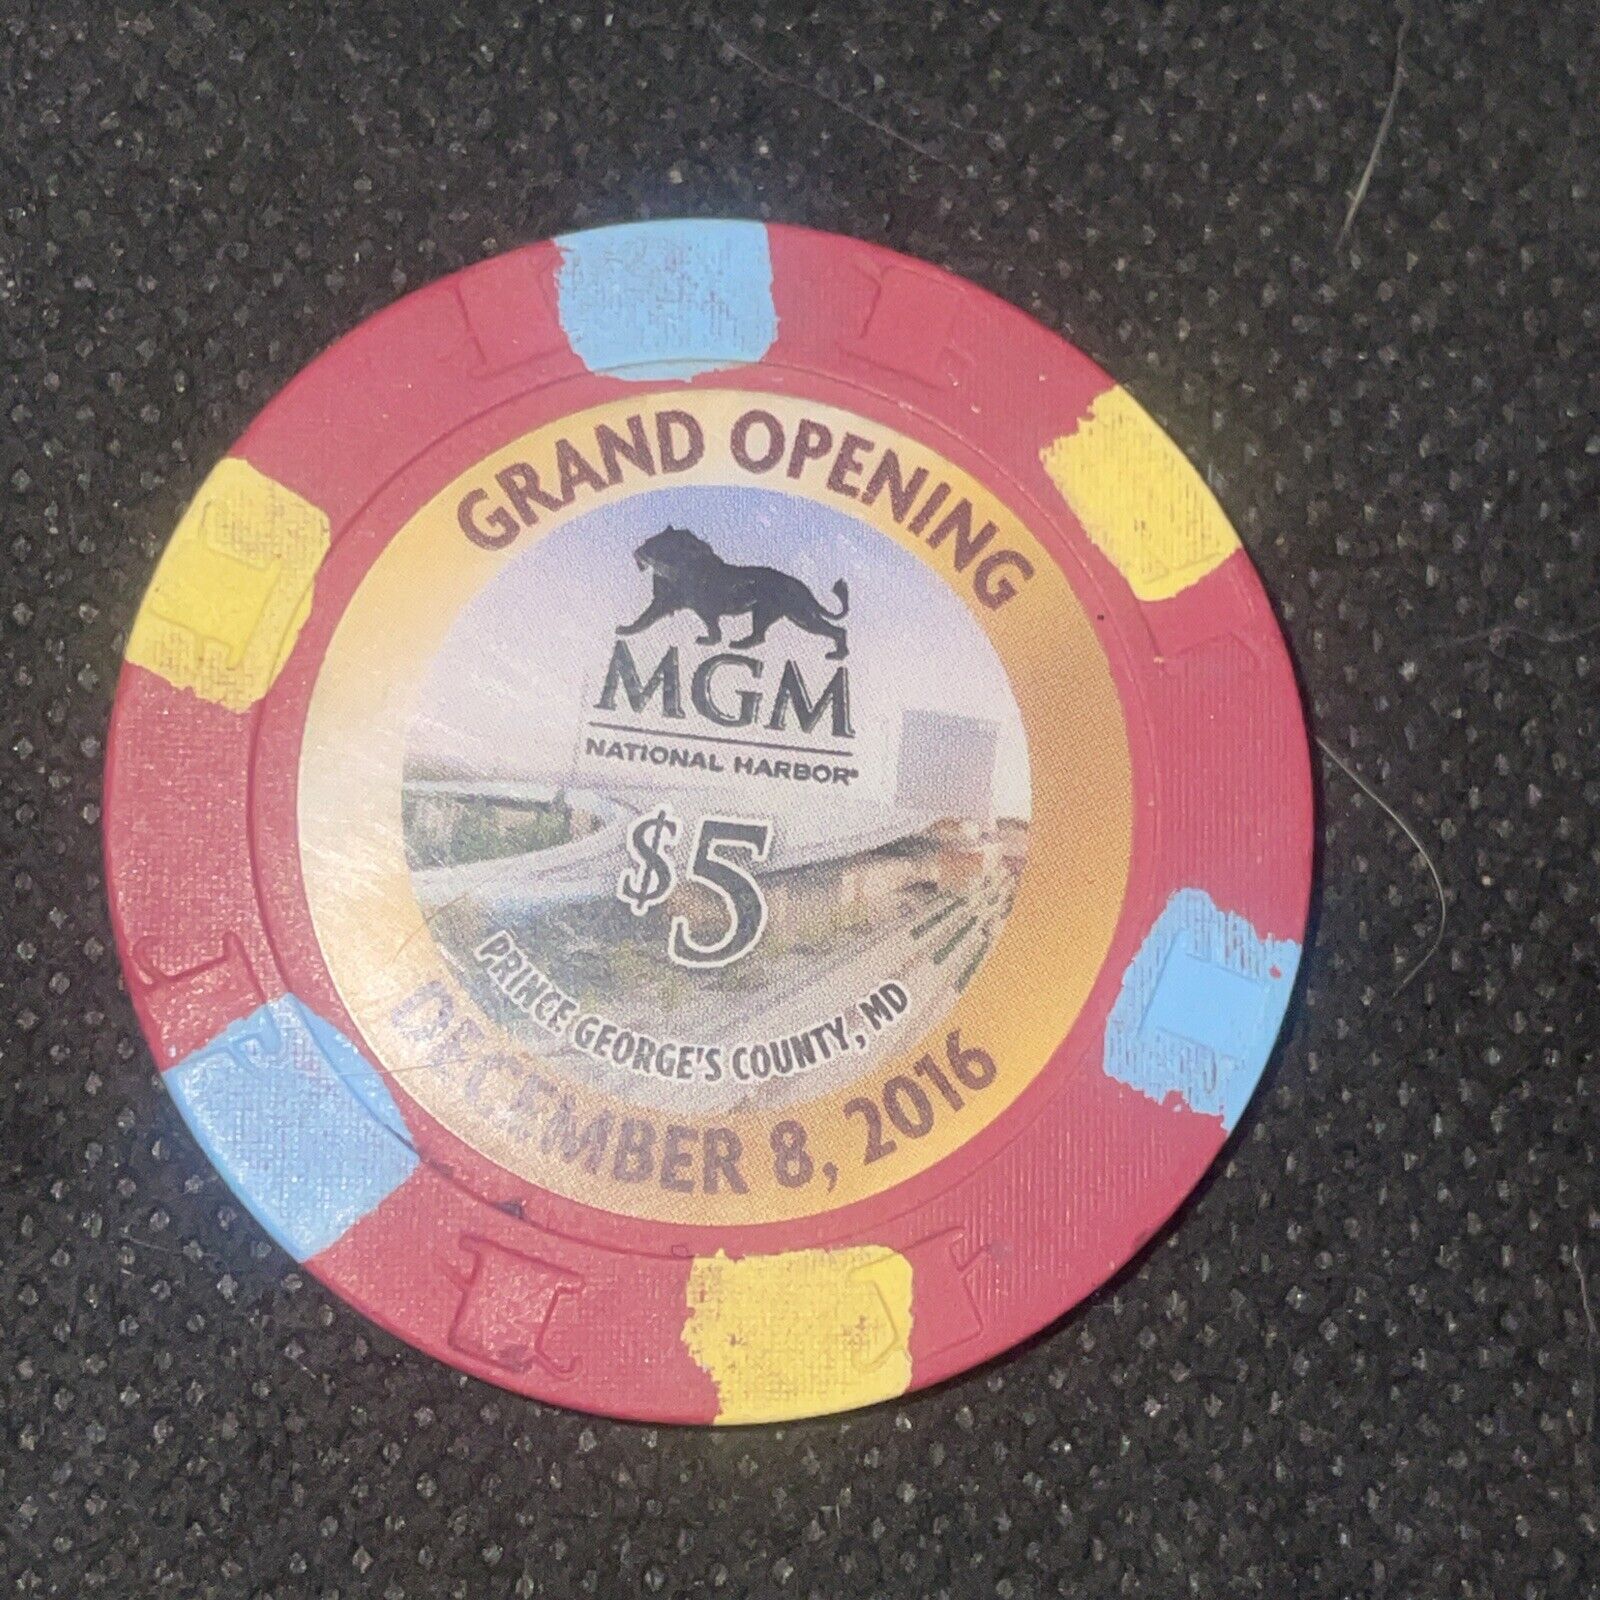 MGM GRAND OPENING  Dec8, 2016 👀. Rare Red $5 Casino Chip . Good Luck🍀